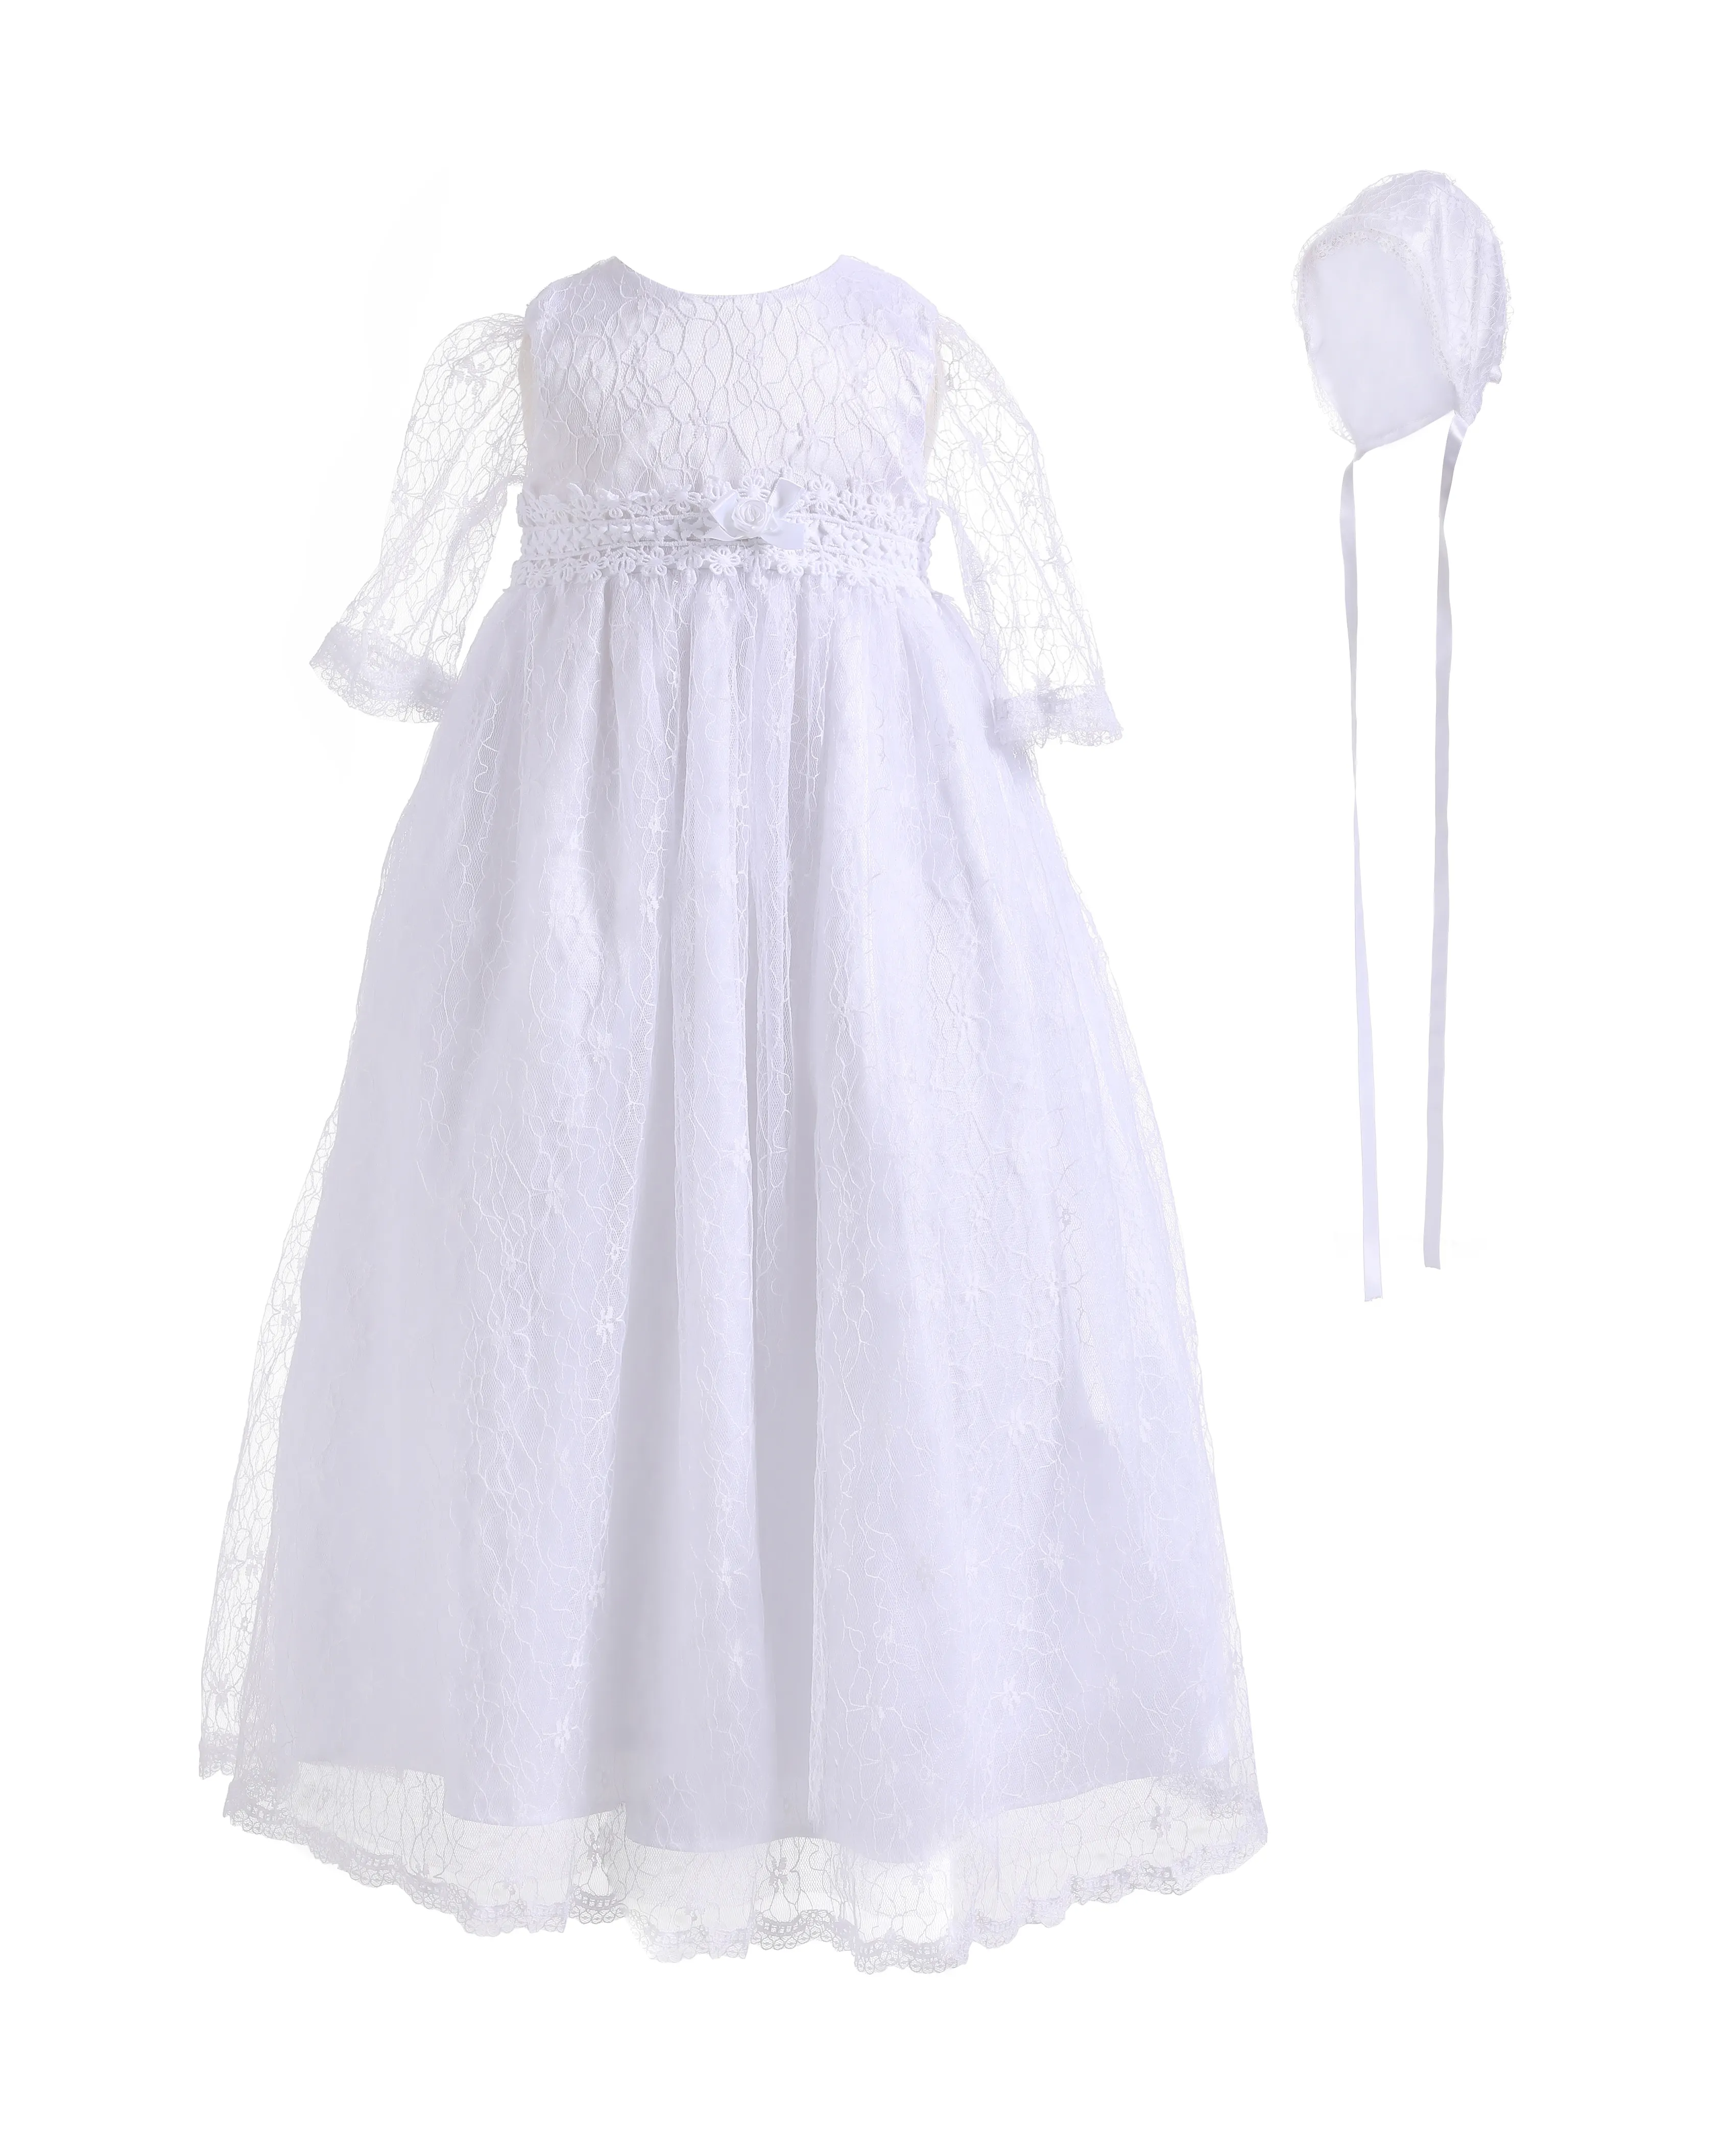 Professional Manufacturer Infant Vintage Girls Long Lace Baptism Dress White Christening Gown/Baby With Hat